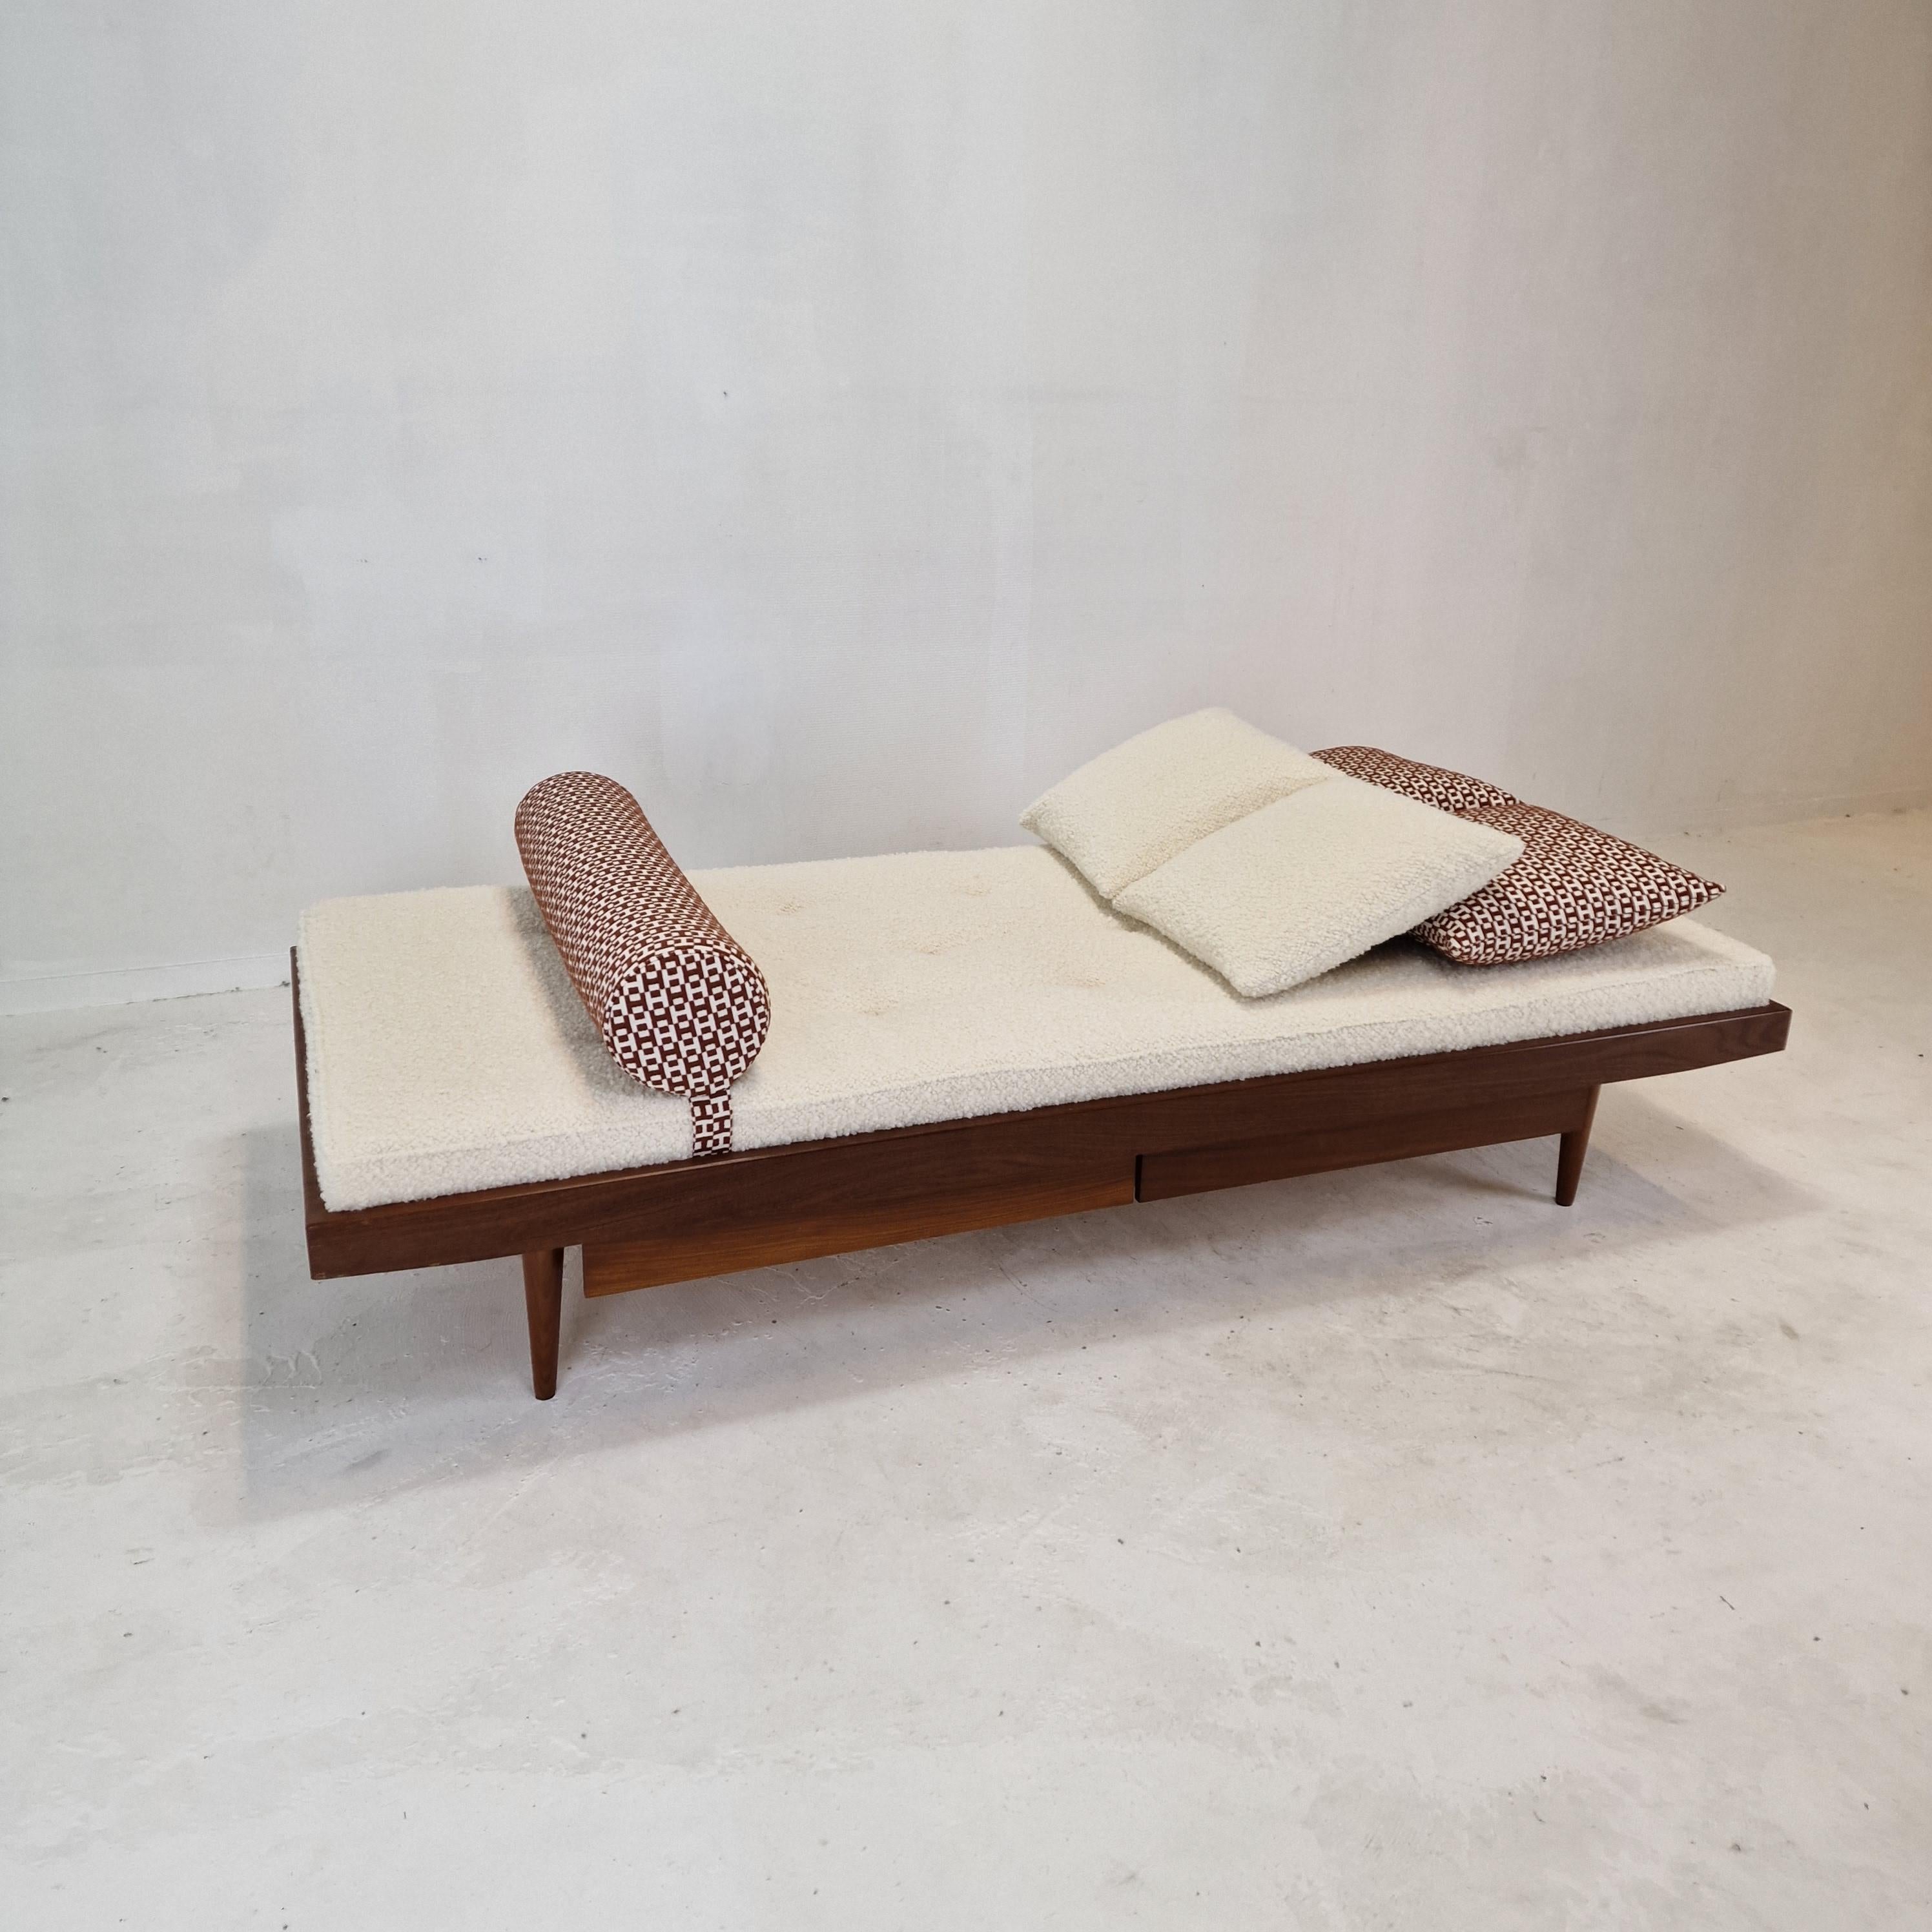 Woven Teak Daybed with Hermes Cushions and Bolster, 1960s For Sale